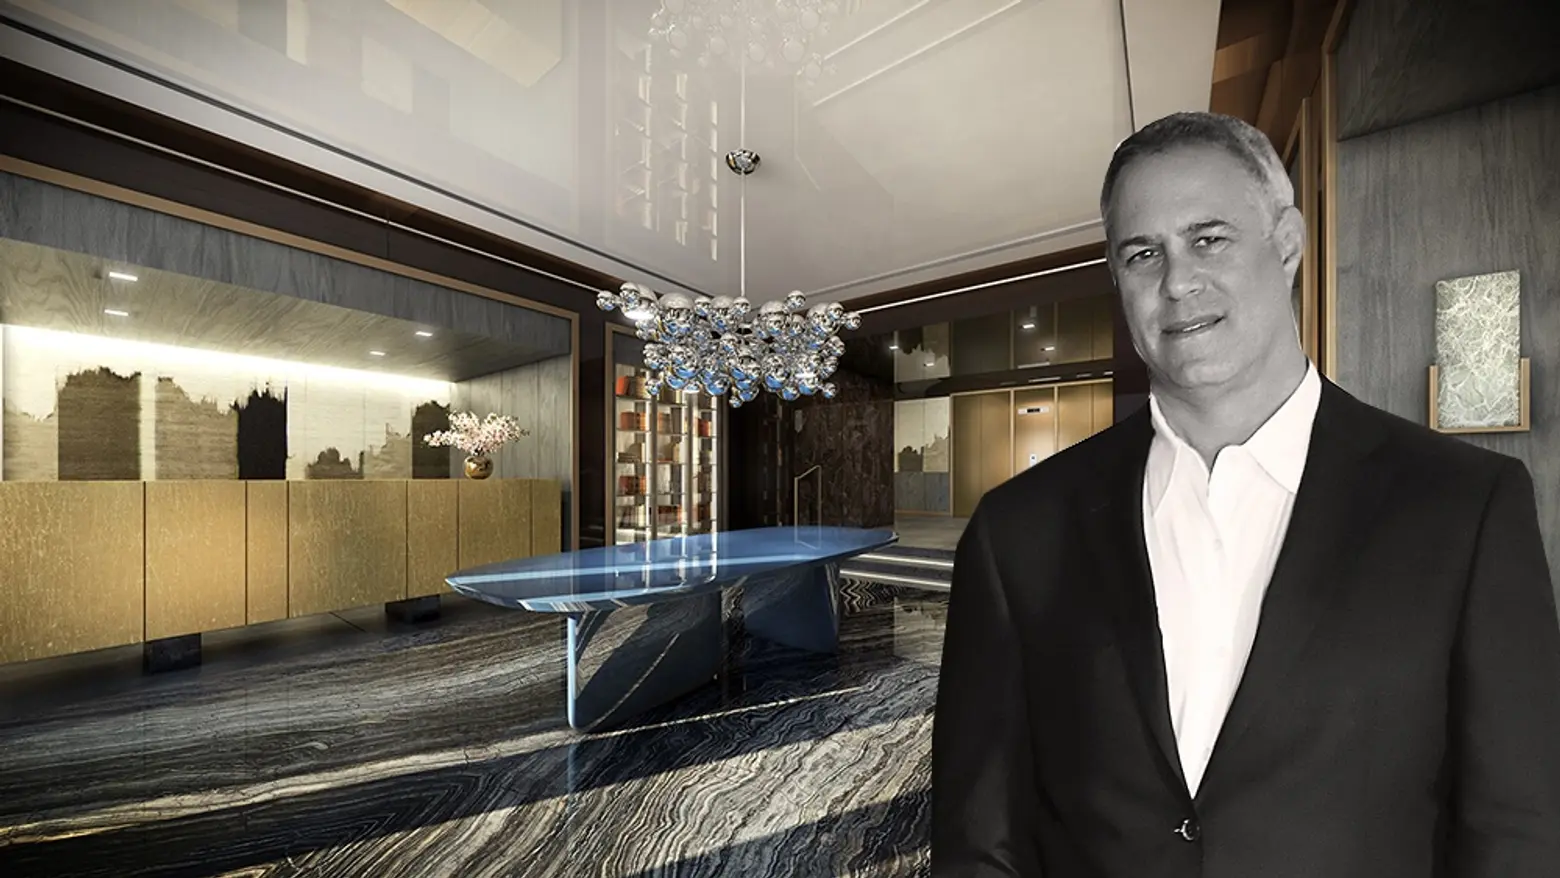 Interview: Pembrooke & Ives founder Andrew Sheinman on outfitting ultra-luxe residences